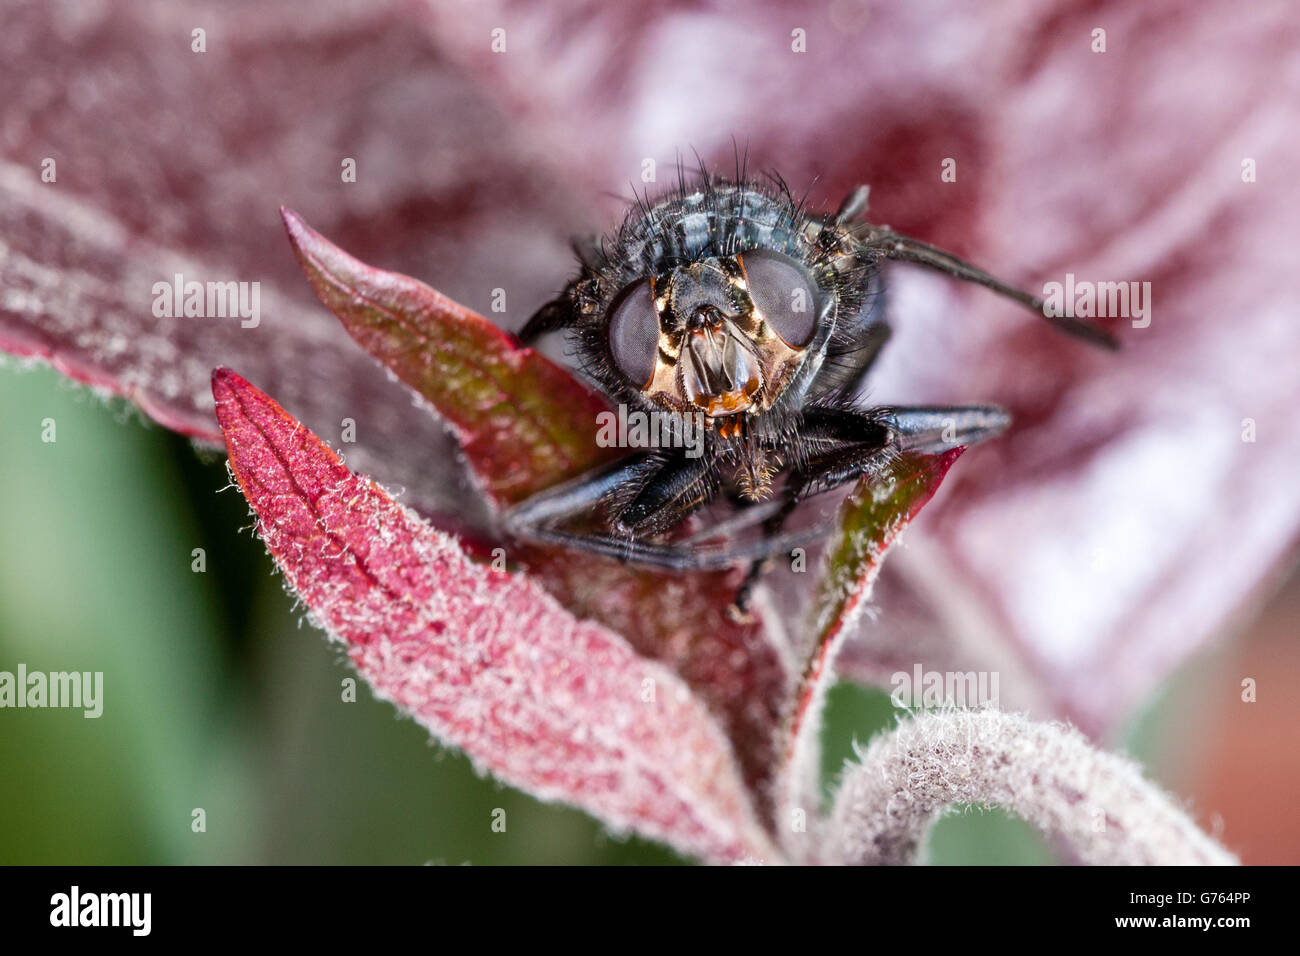 Macro head shot of a house fly (Blue Bottle Fly) on a plant with detailed eyes and facial features. Stock Photo